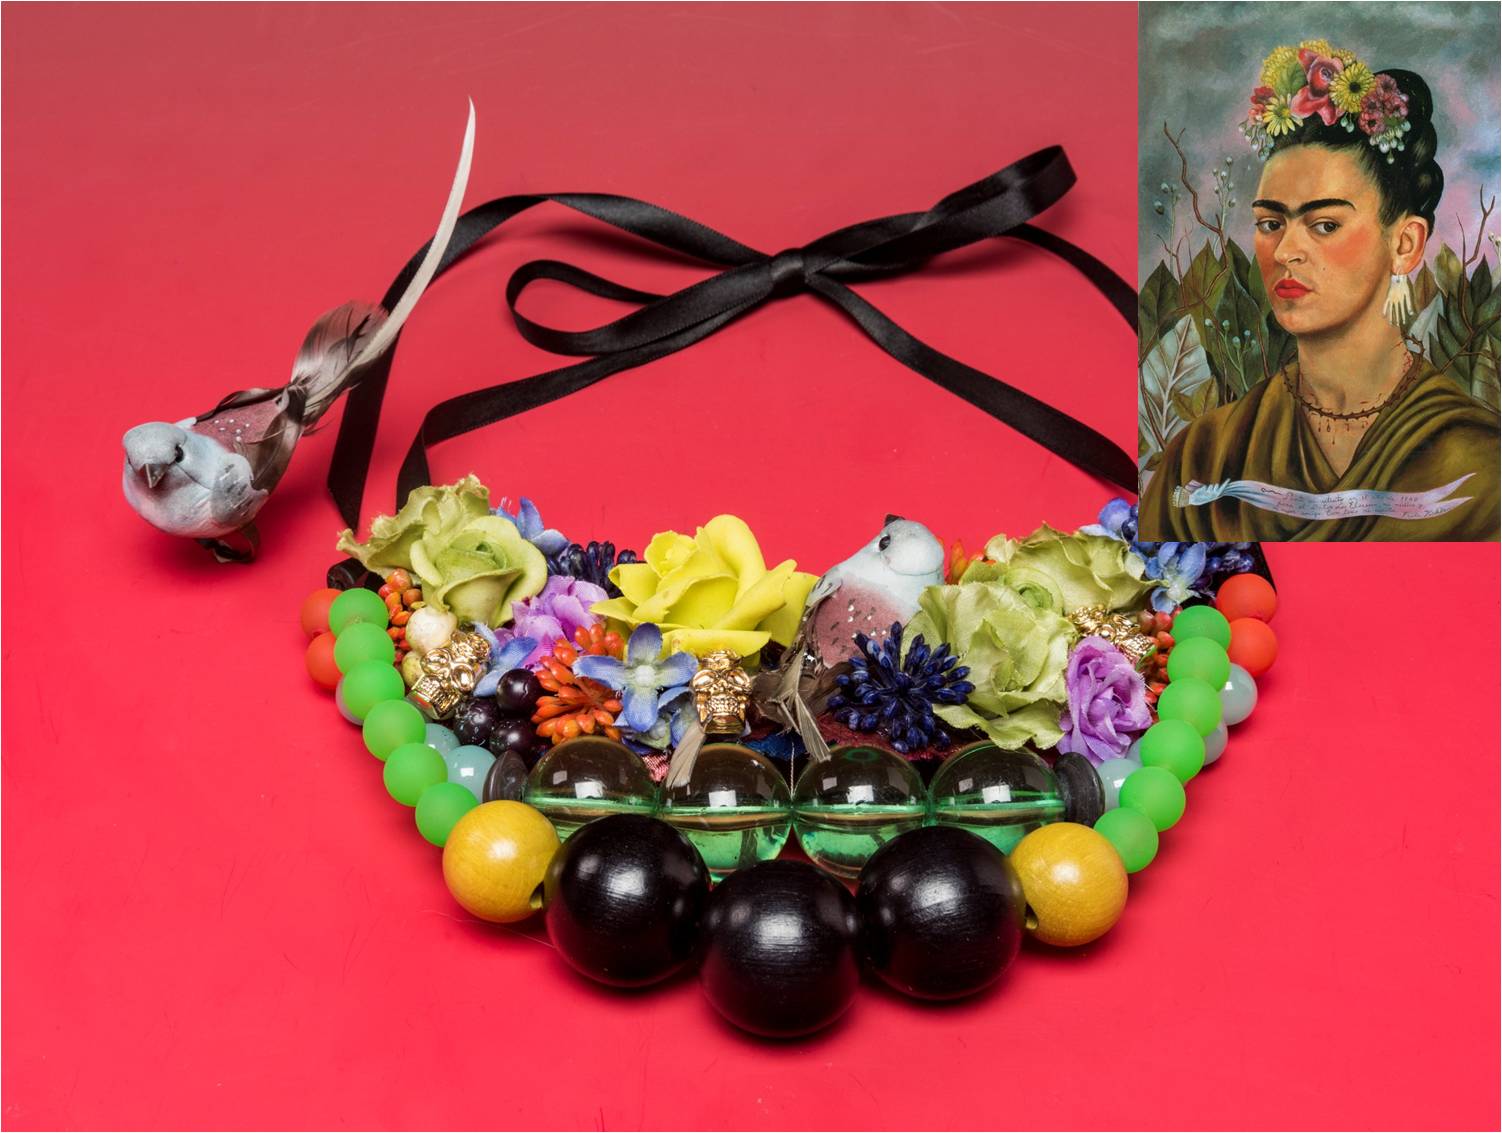 Necklace and ring Frida's garden inspireed by headband decoration on Frida's Self-portrait dedicated to Dr. Eloessser